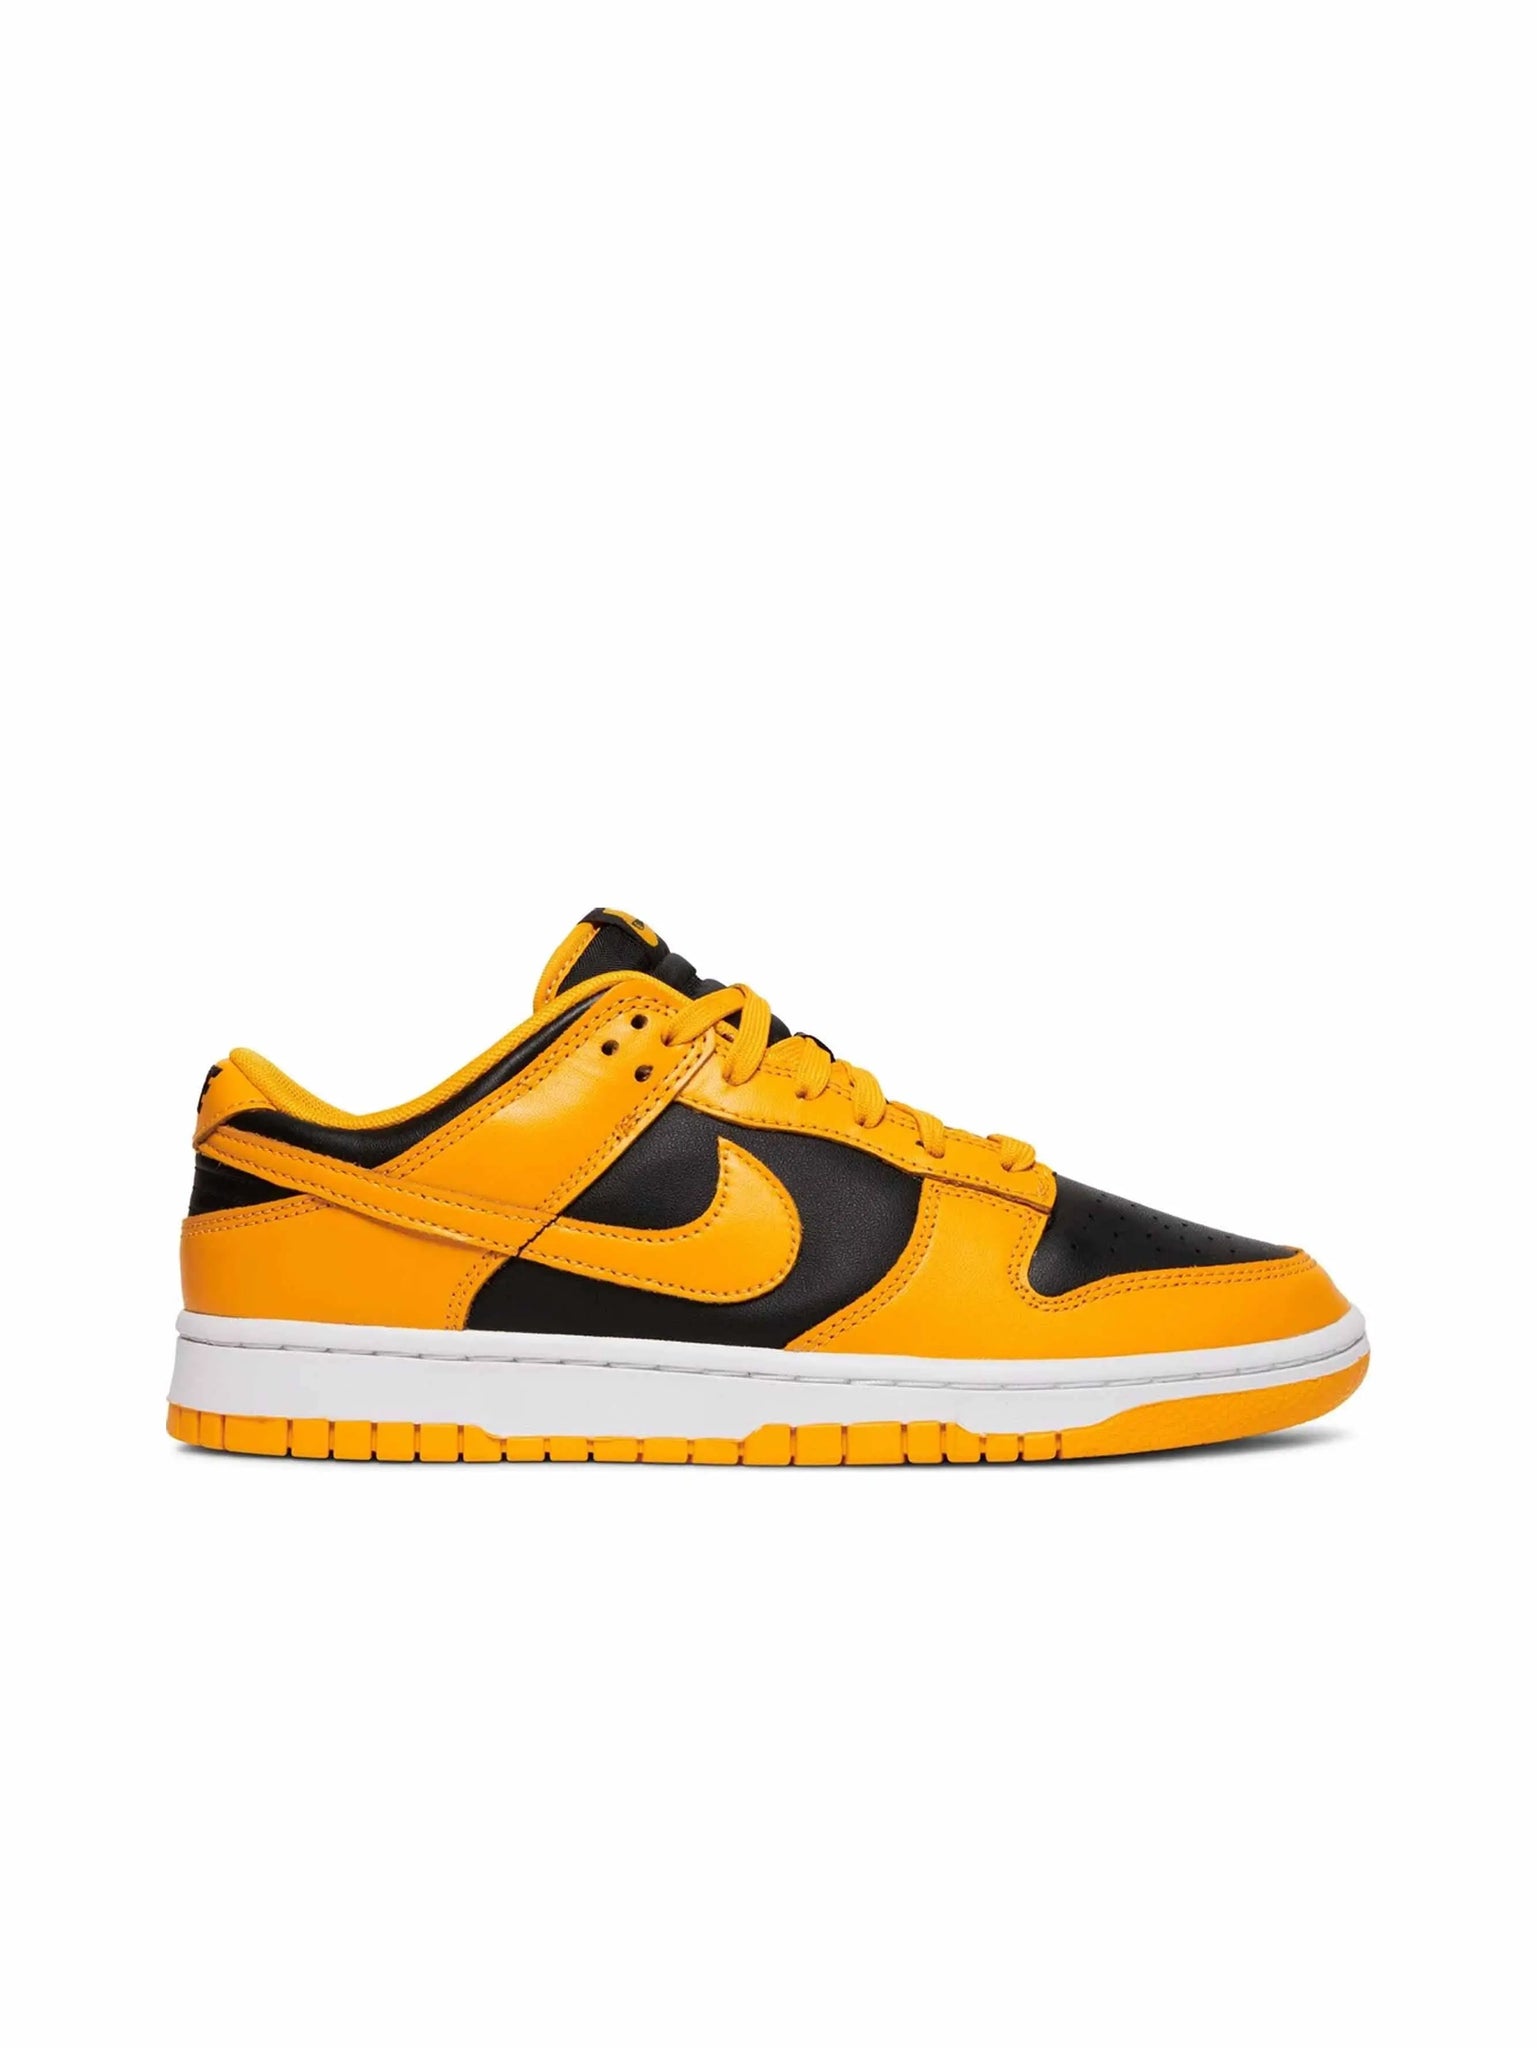 Nike Dunk Low Championship Goldenrod (2021) in Auckland, New Zealand - Shop name